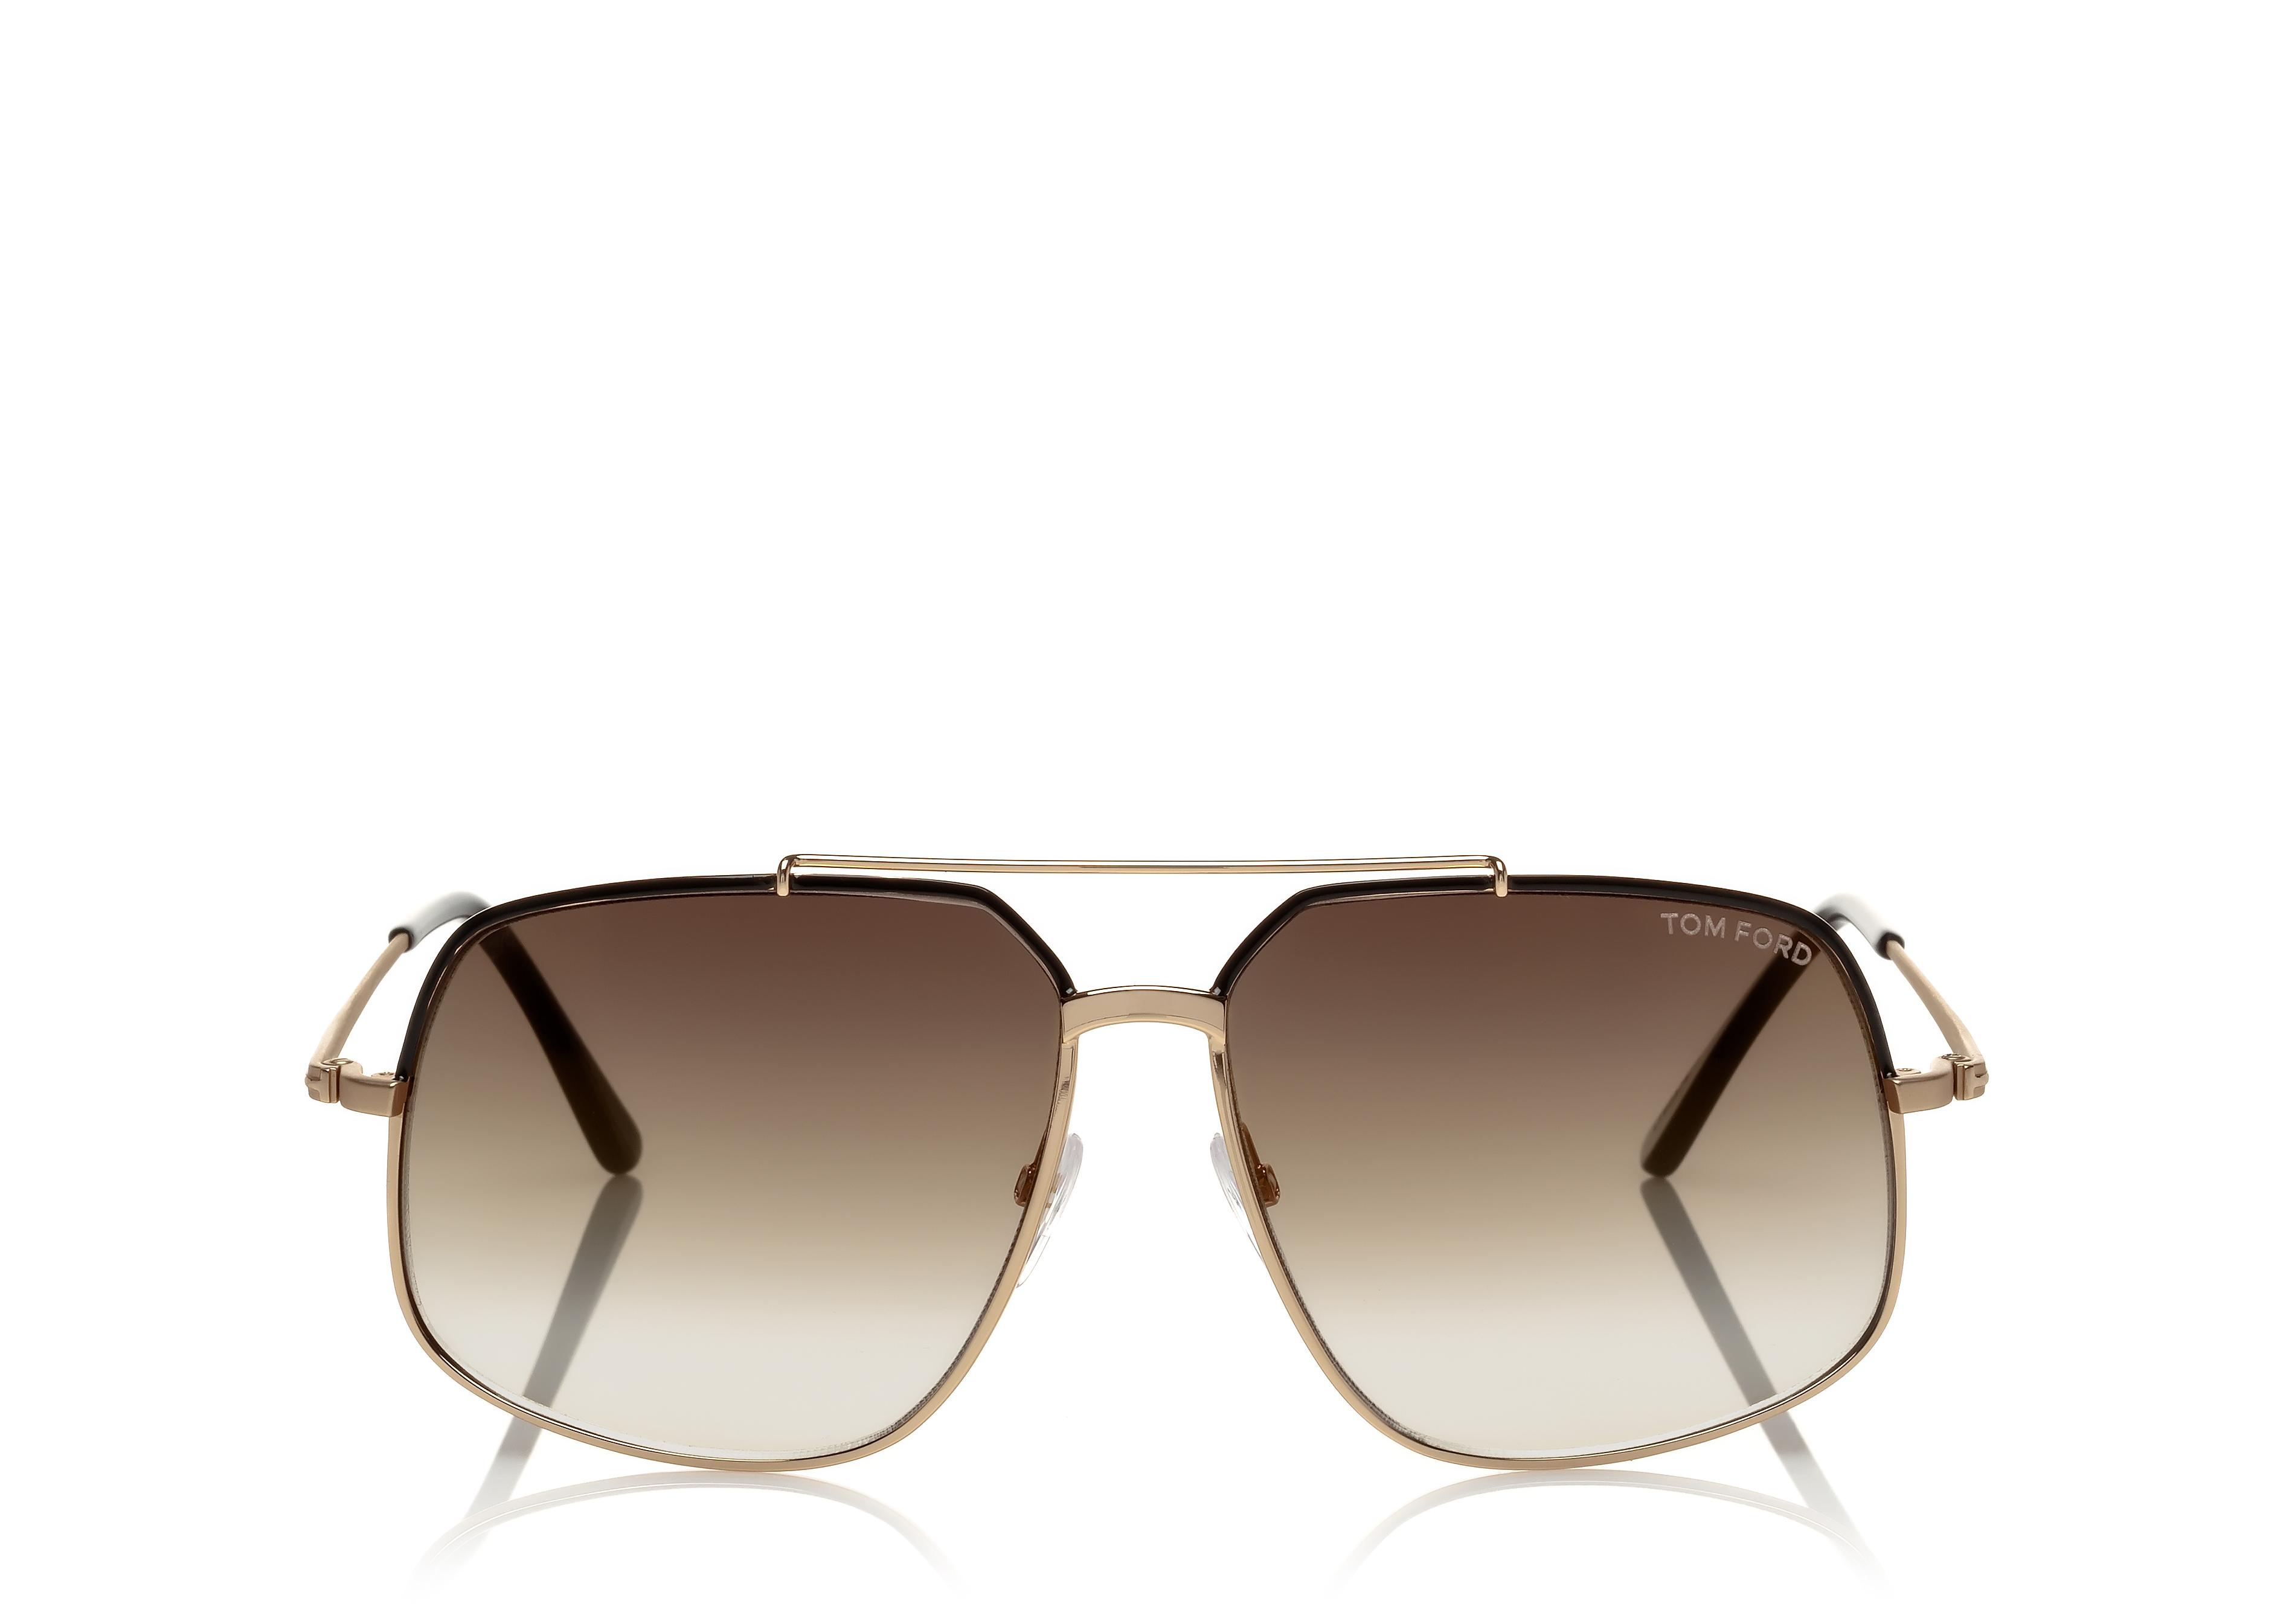 Tom Ford Ronnie Navigator Sunglasses in Brown for Men - Lyst